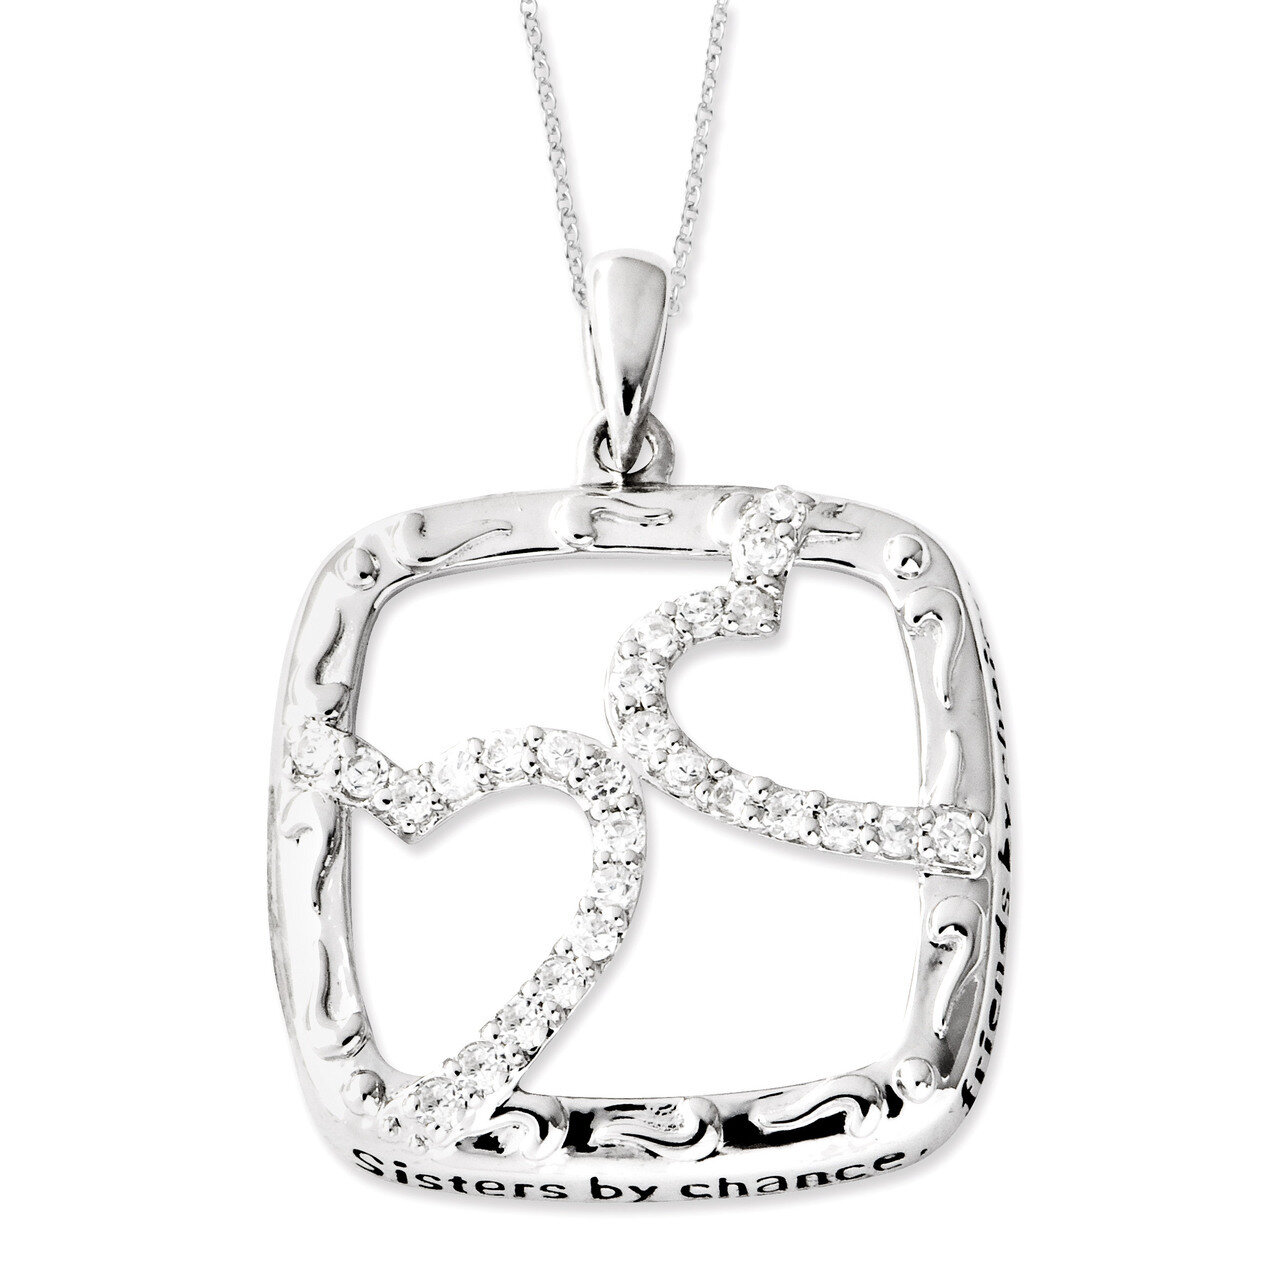 Diamond Sisters By Chance 18 Inch Hearts Necklace Sterling Silver Antiqued QSX440